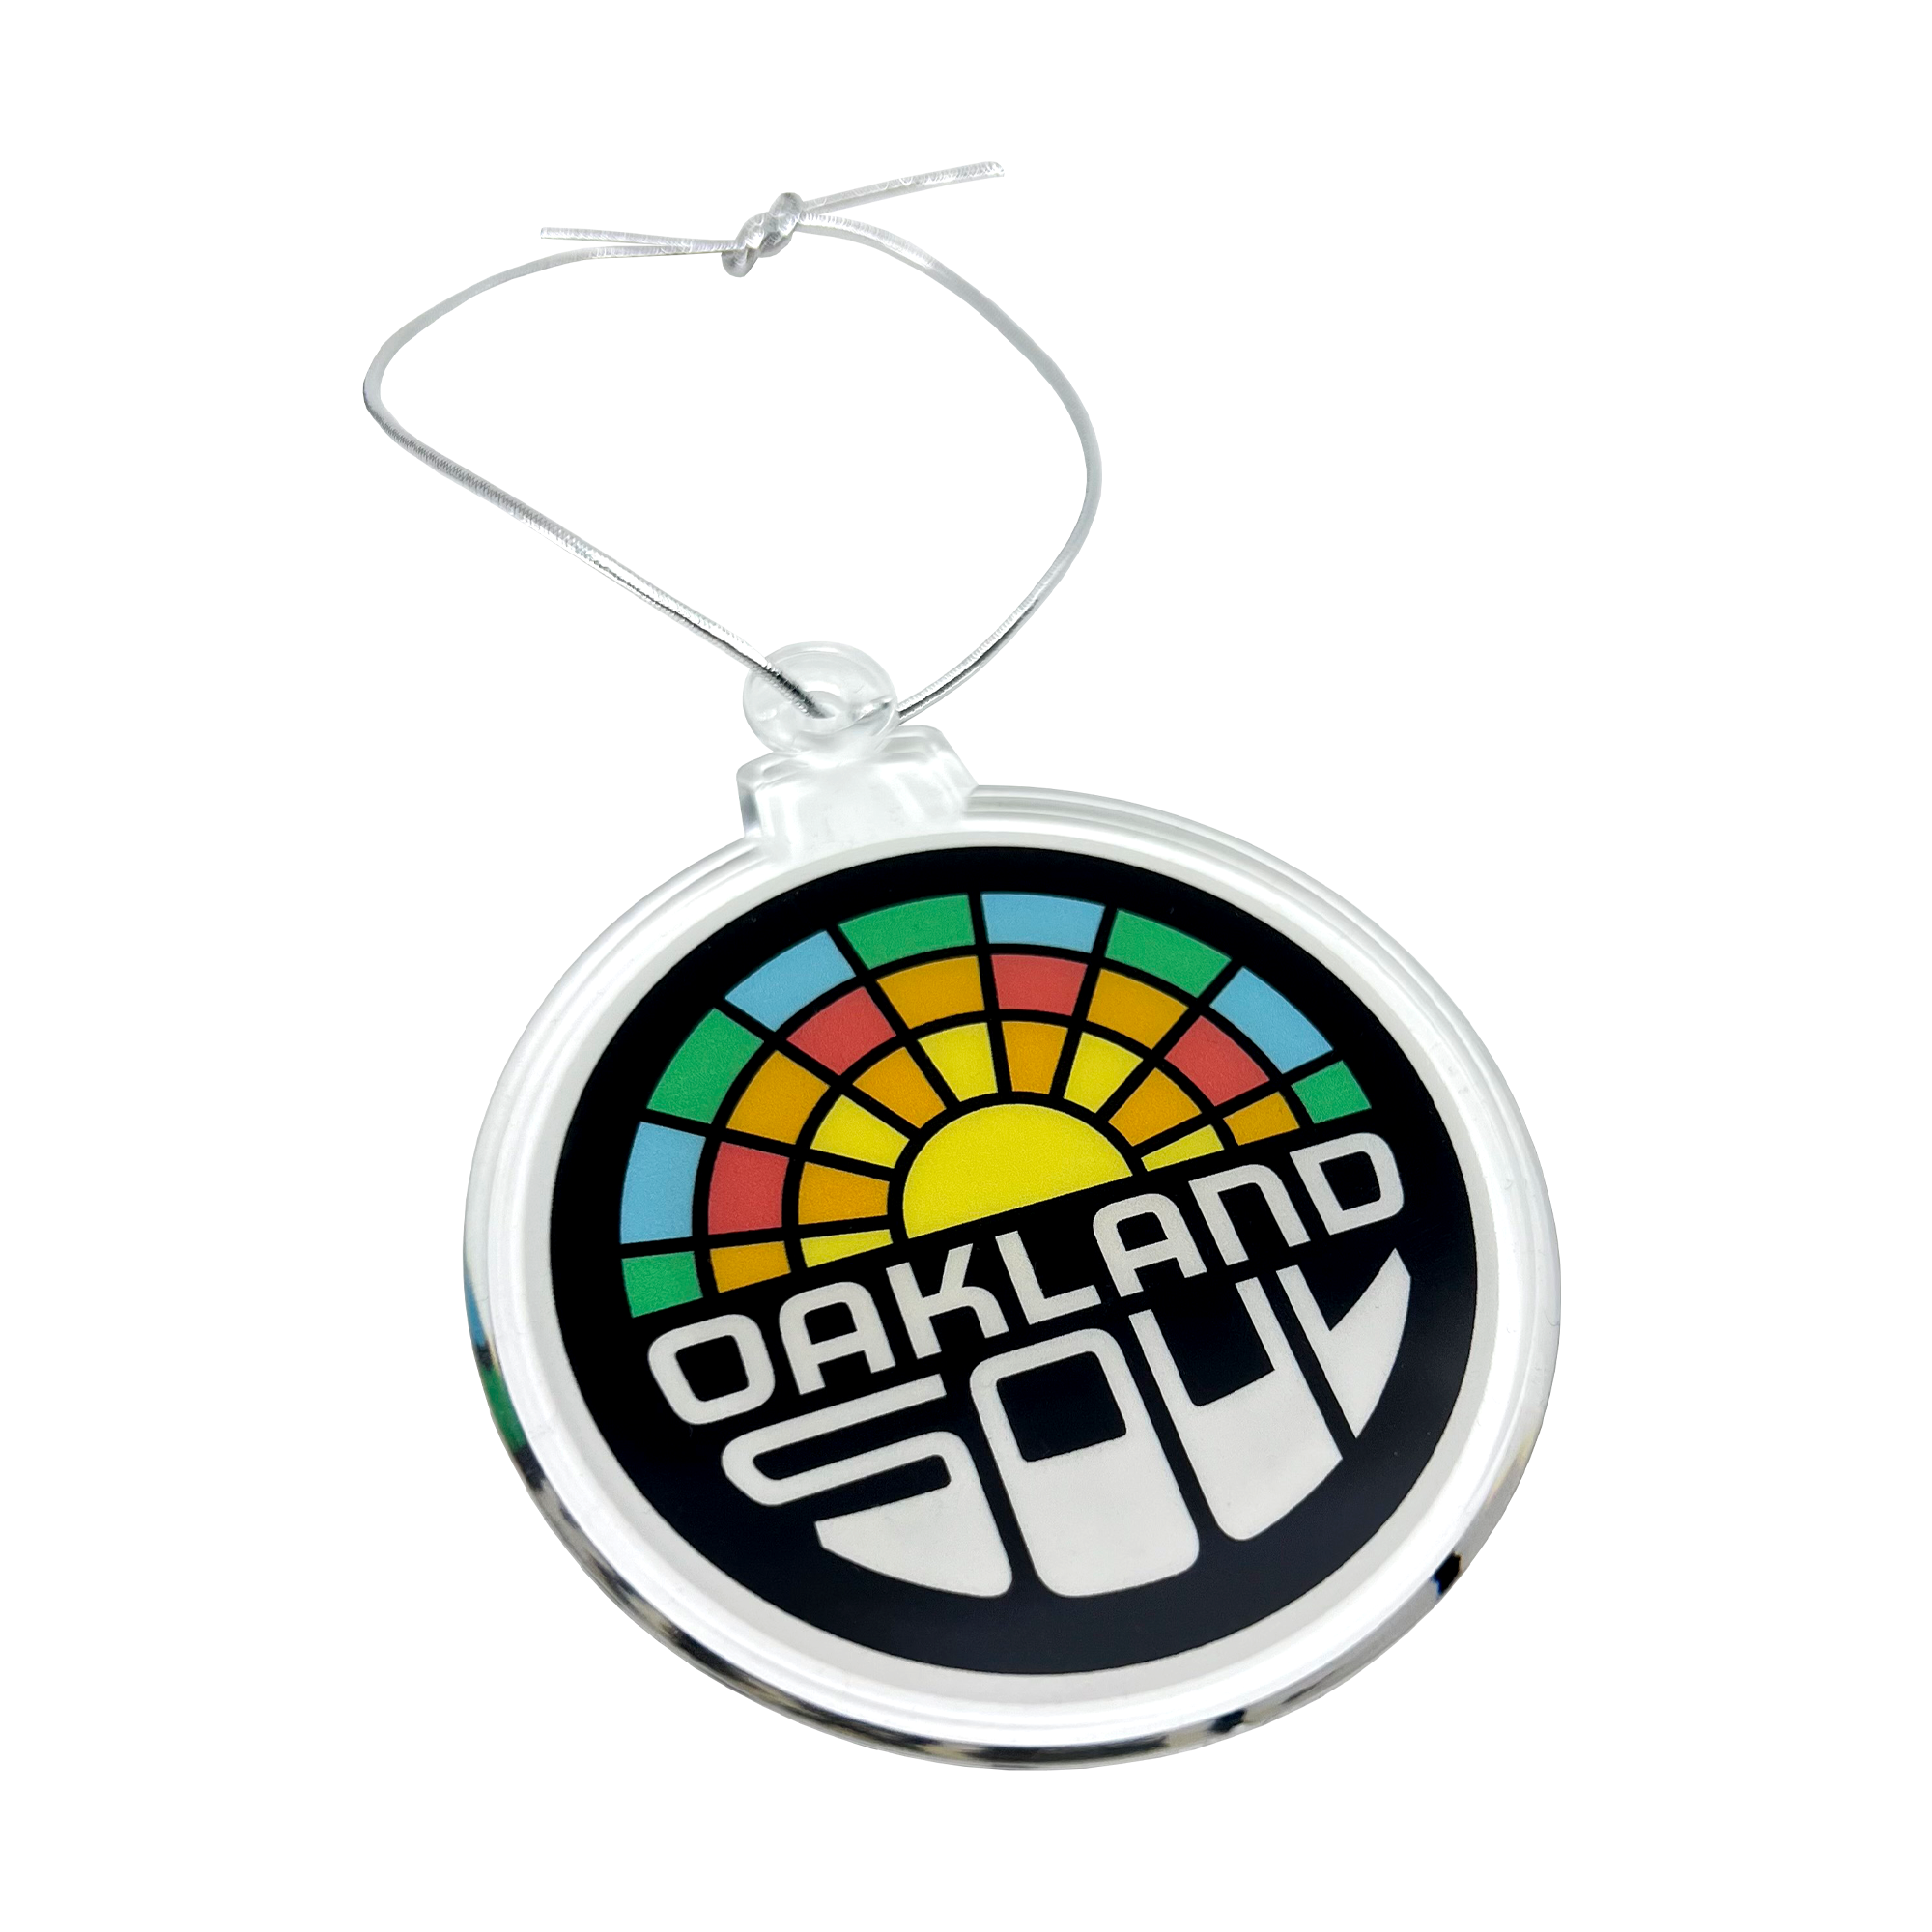 Side view of full-color Oakland soul crest  on a holiday tree ornament with silver string.